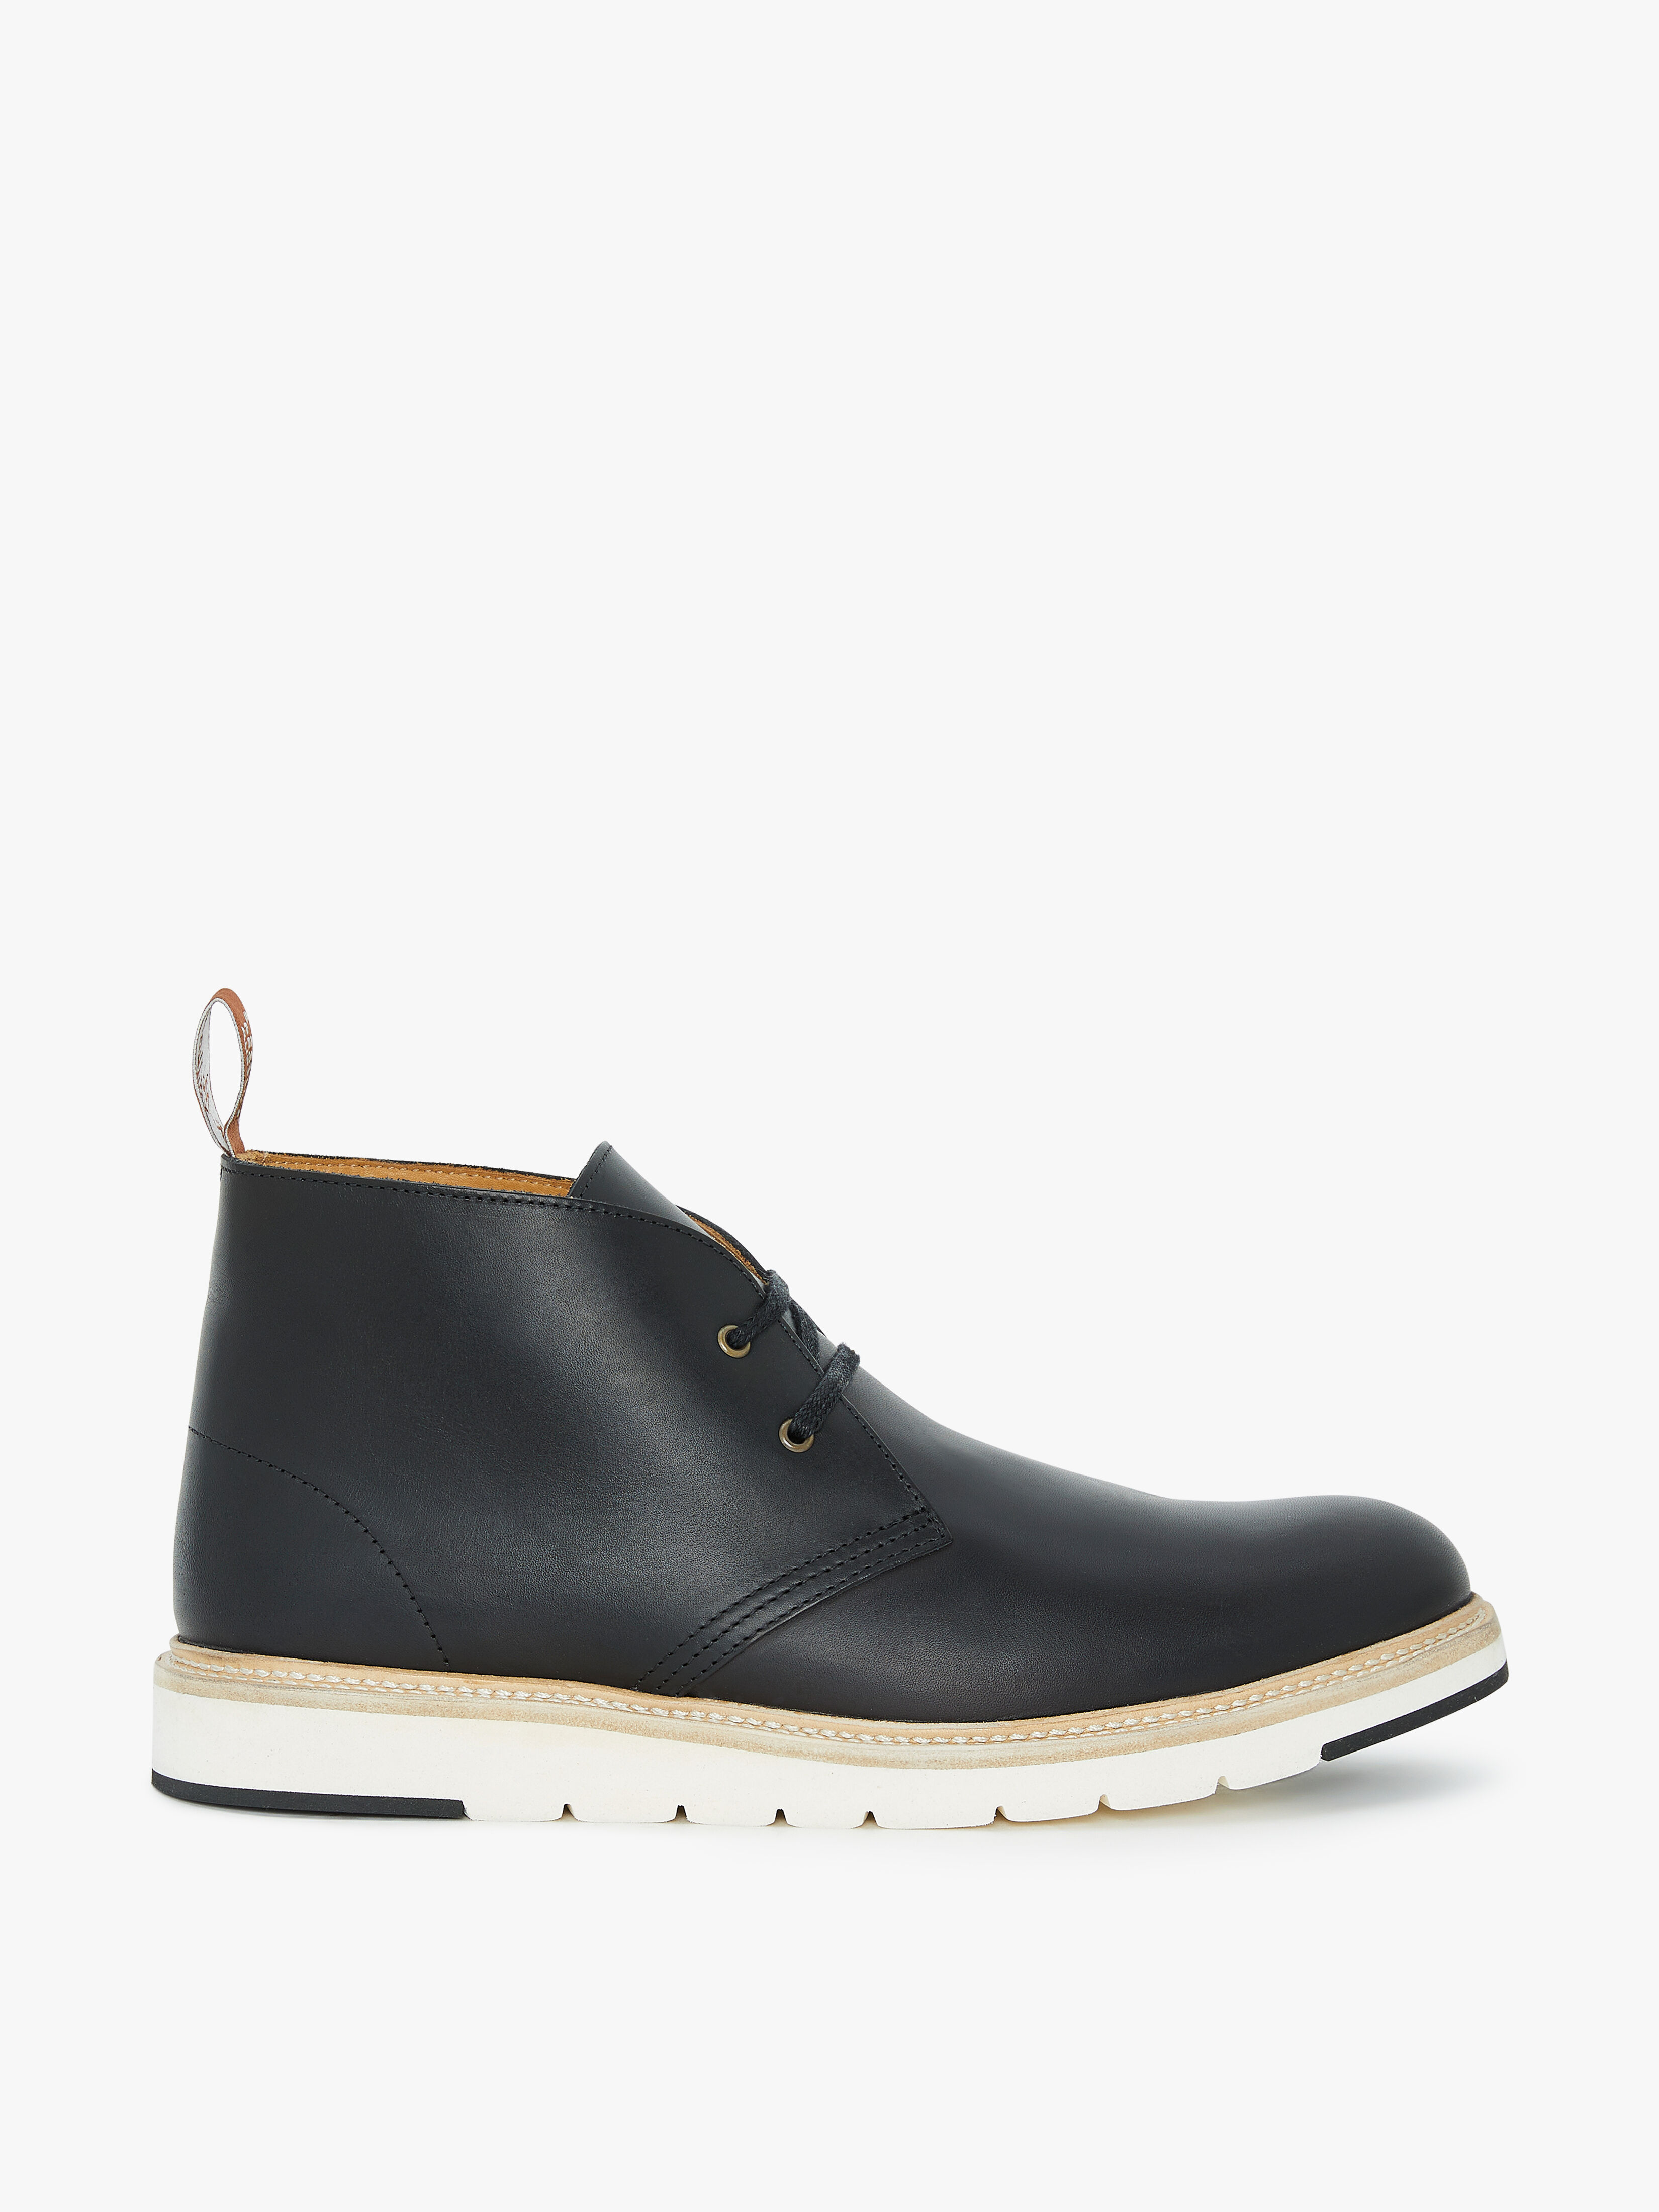 rm williams lace up